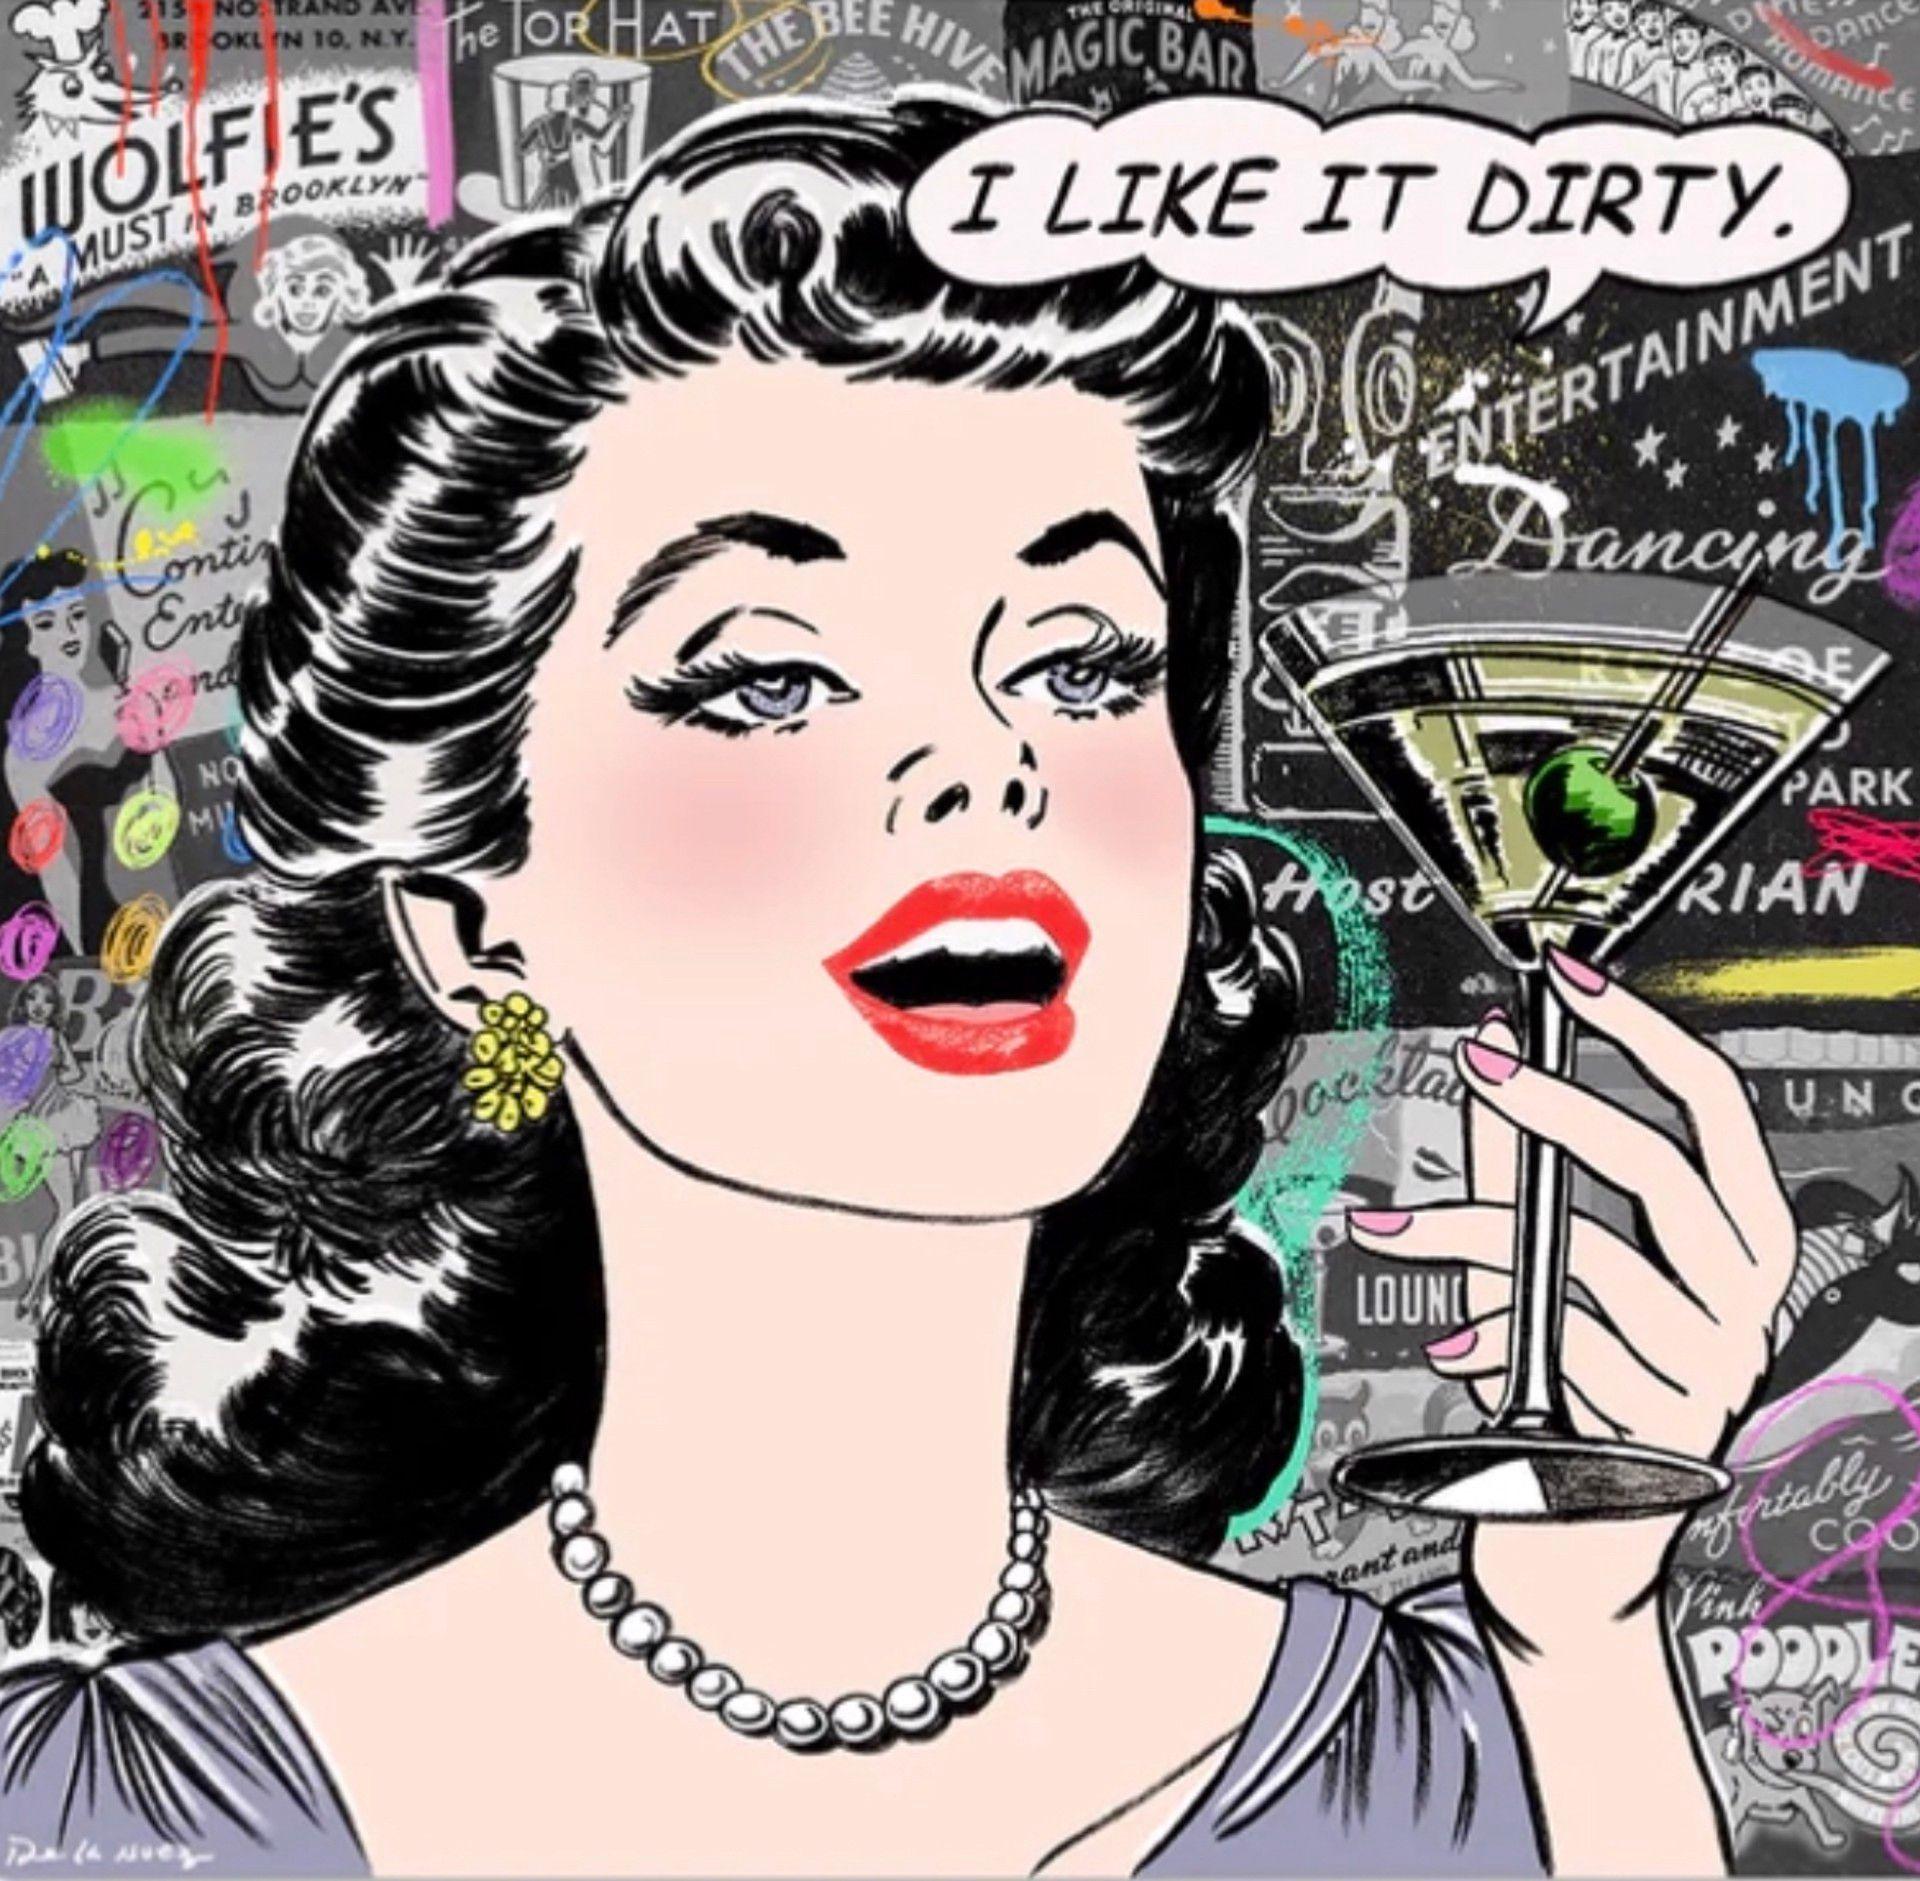 Nelson De La Nuez "Dirty Girl" at the White Room Gallery in East Hampton, New York